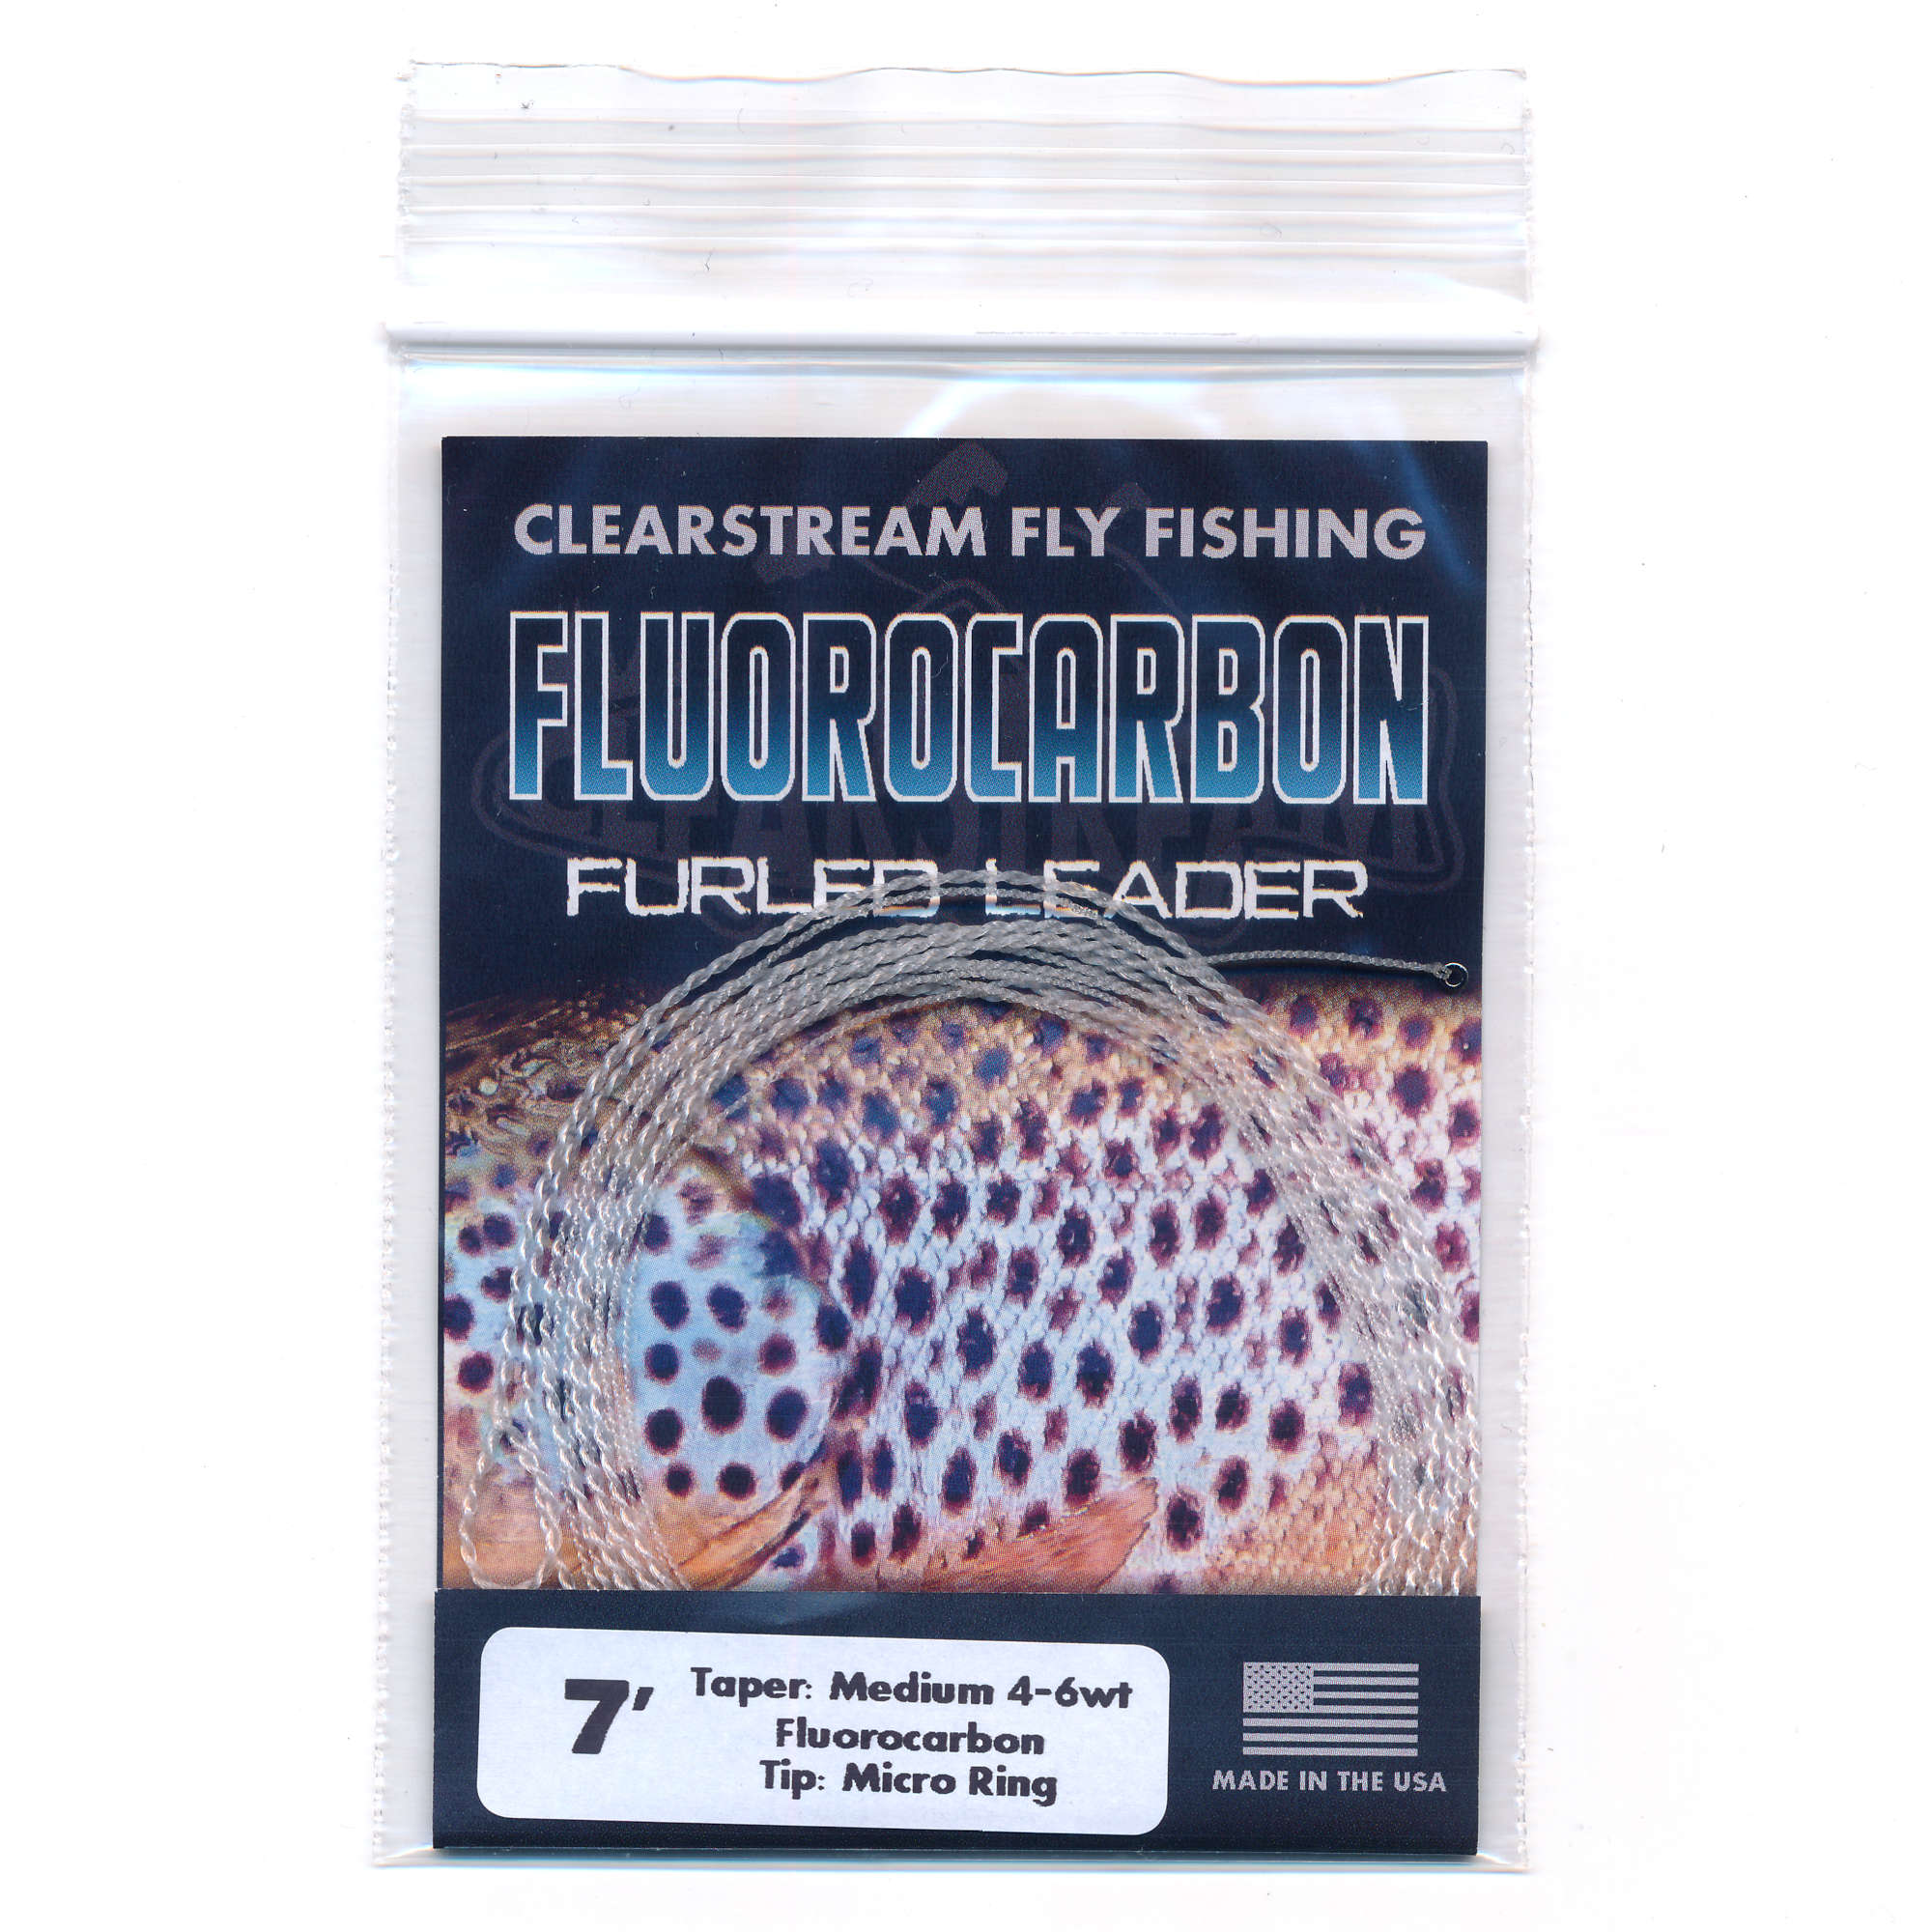 Fluorocarbon Furled Leader – Clearstream Fly Fishing